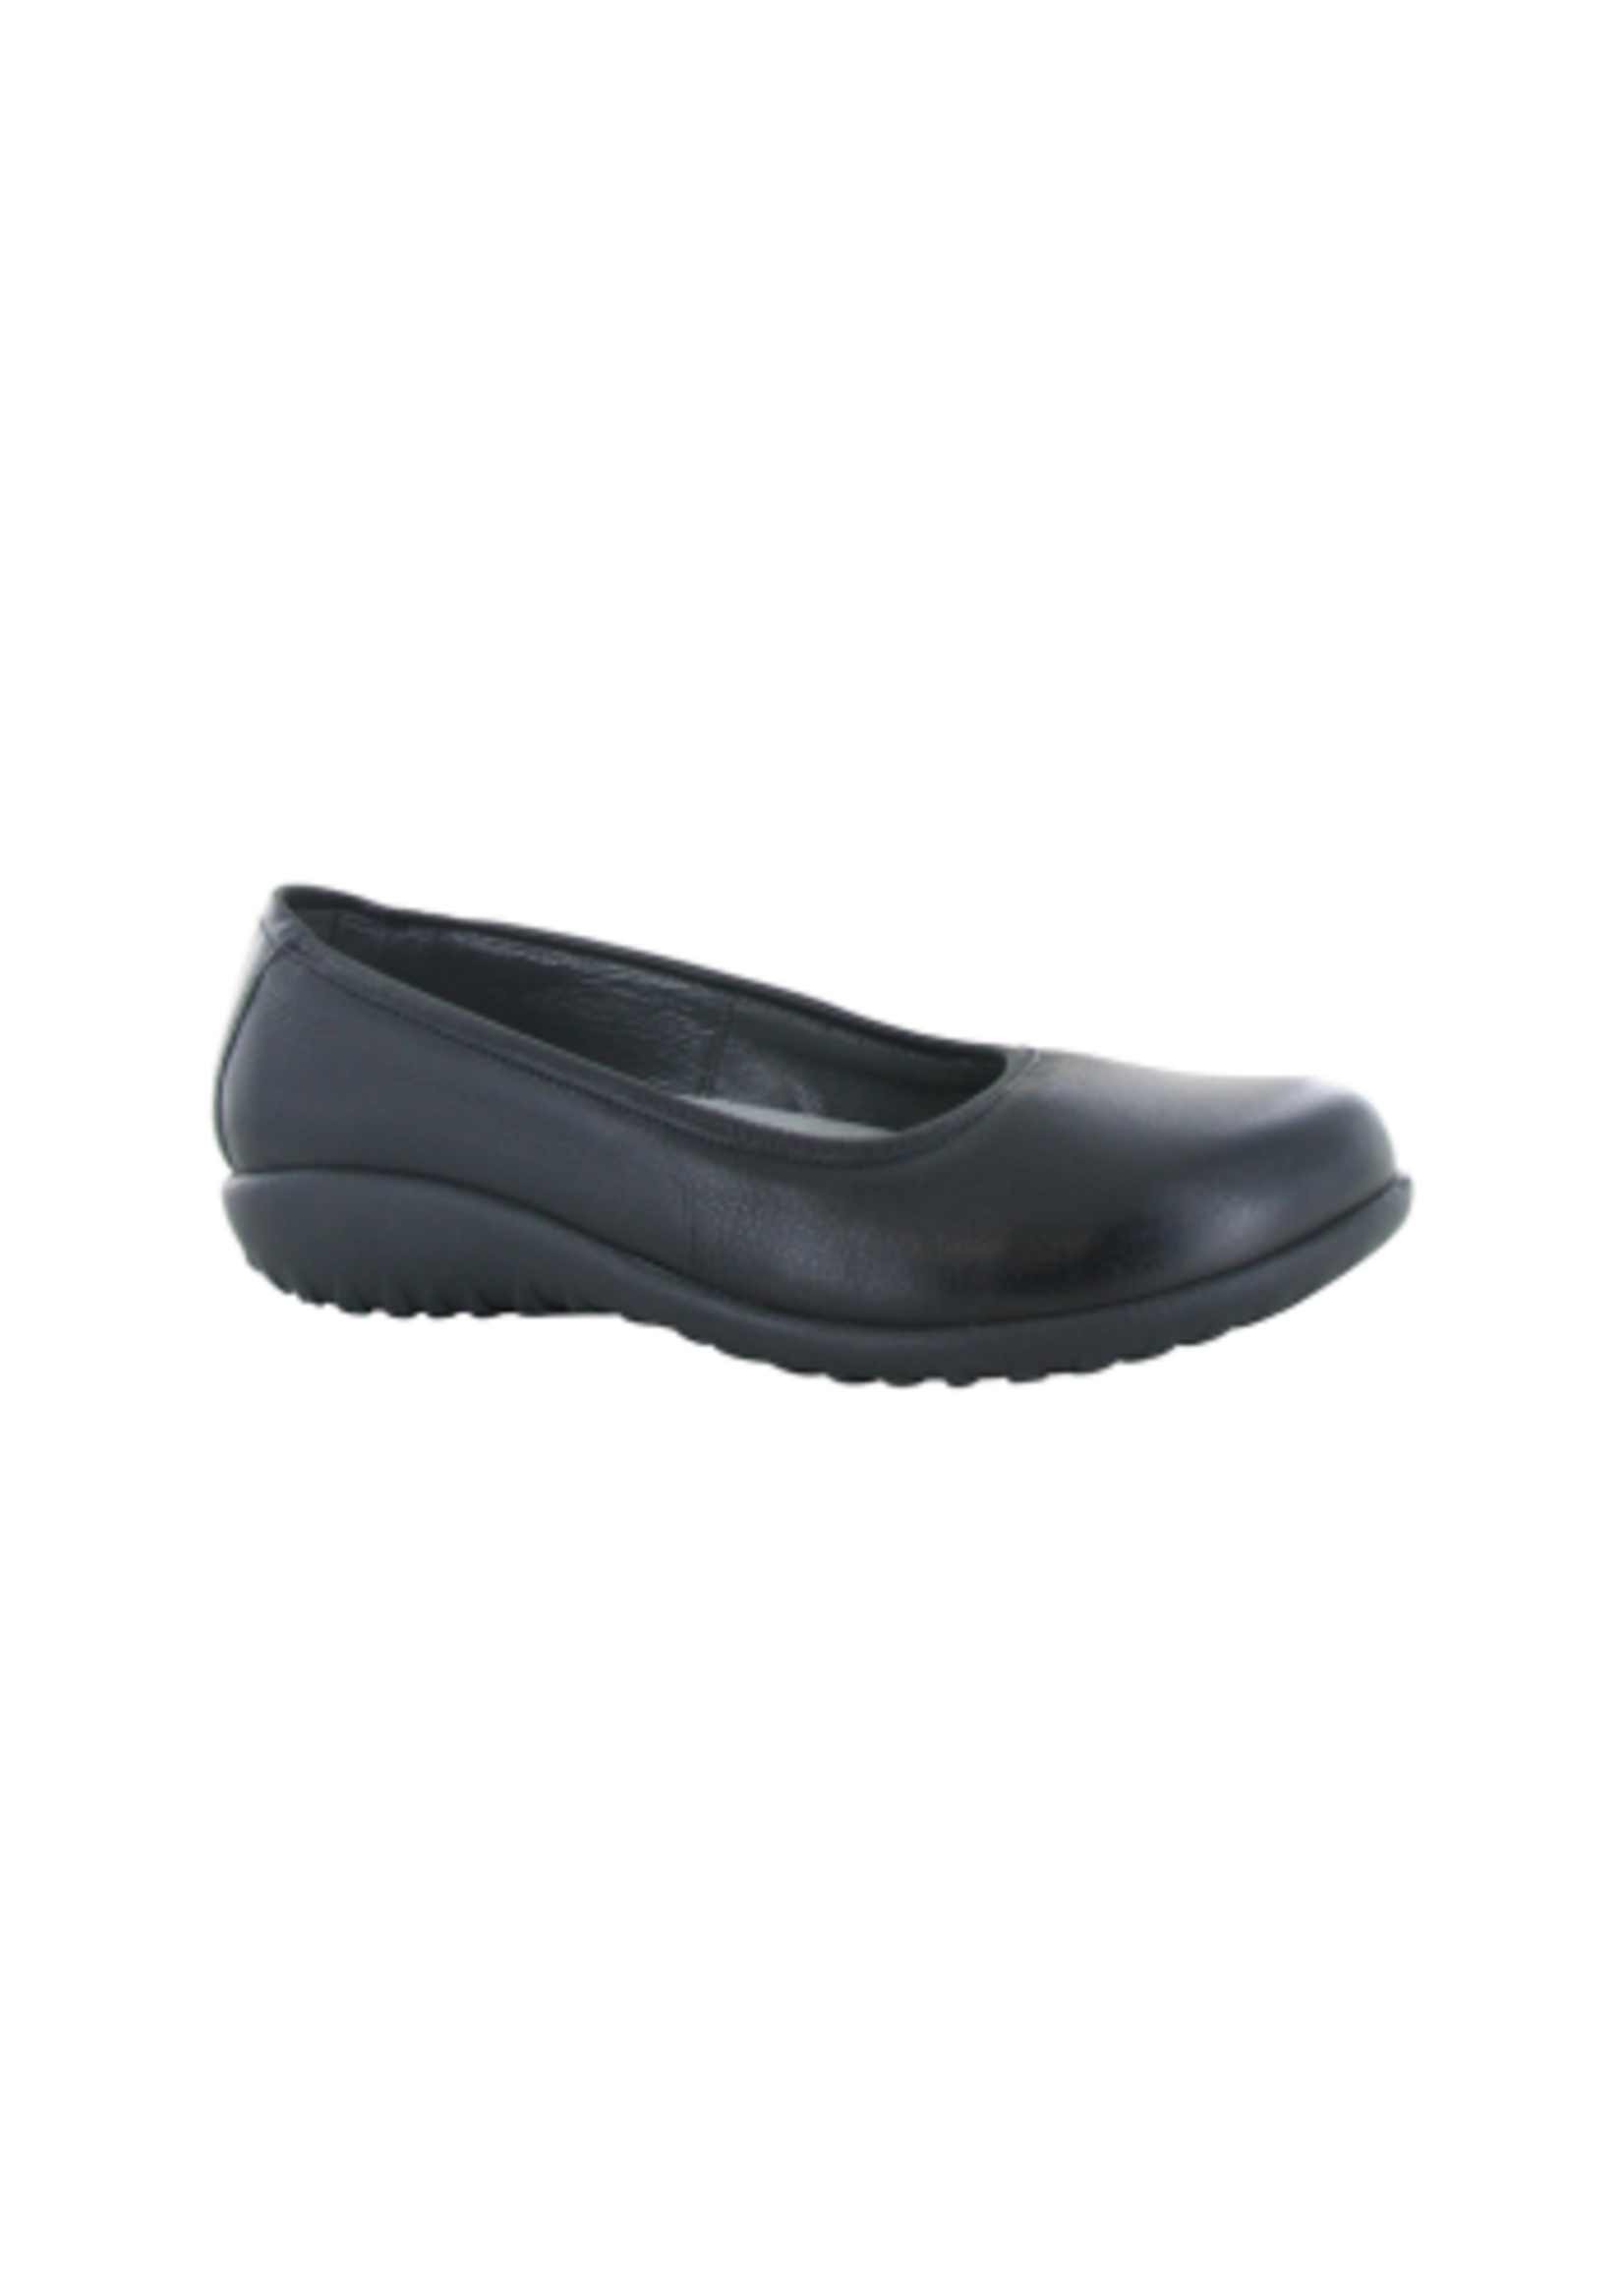 Naot Footwear Taupo in Soft Black